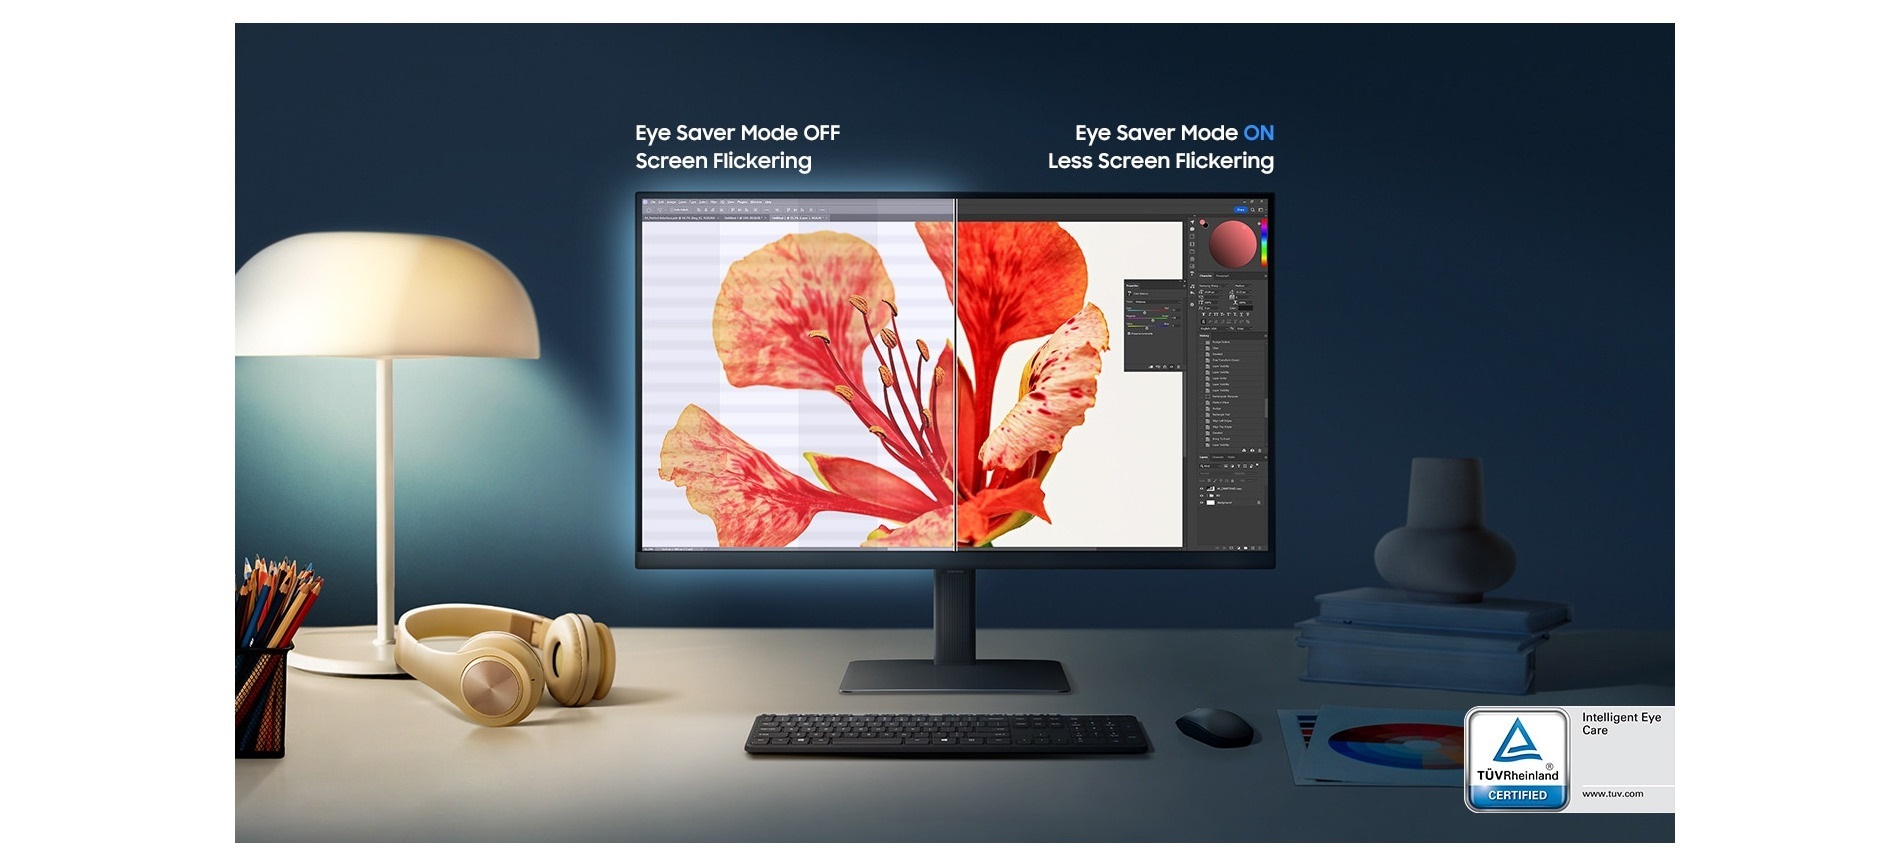 A large marketing image providing additional information about the product Samsung ViewFinity S60UD 32" 1440p 100Hz IPS Monitor - Additional alt info not provided